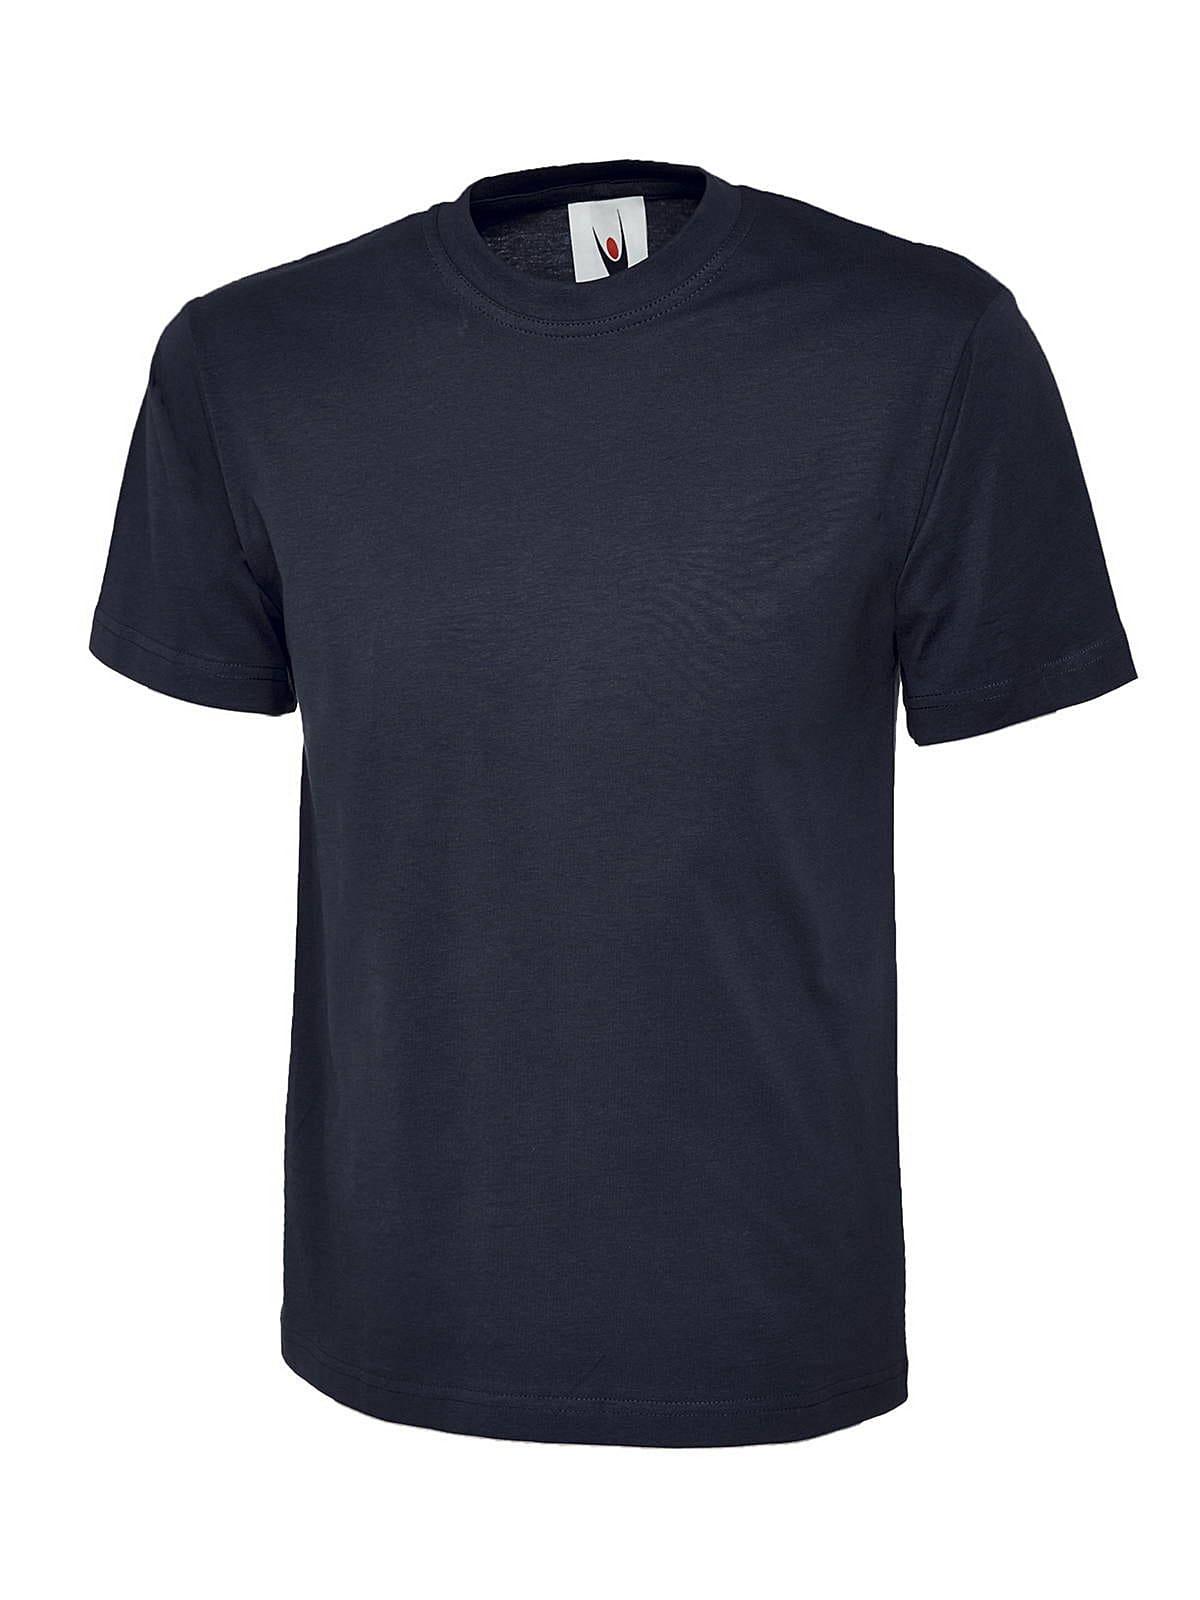 Uneek Childrens 180GSM T-Shirt in Navy (Product Code: UC306)